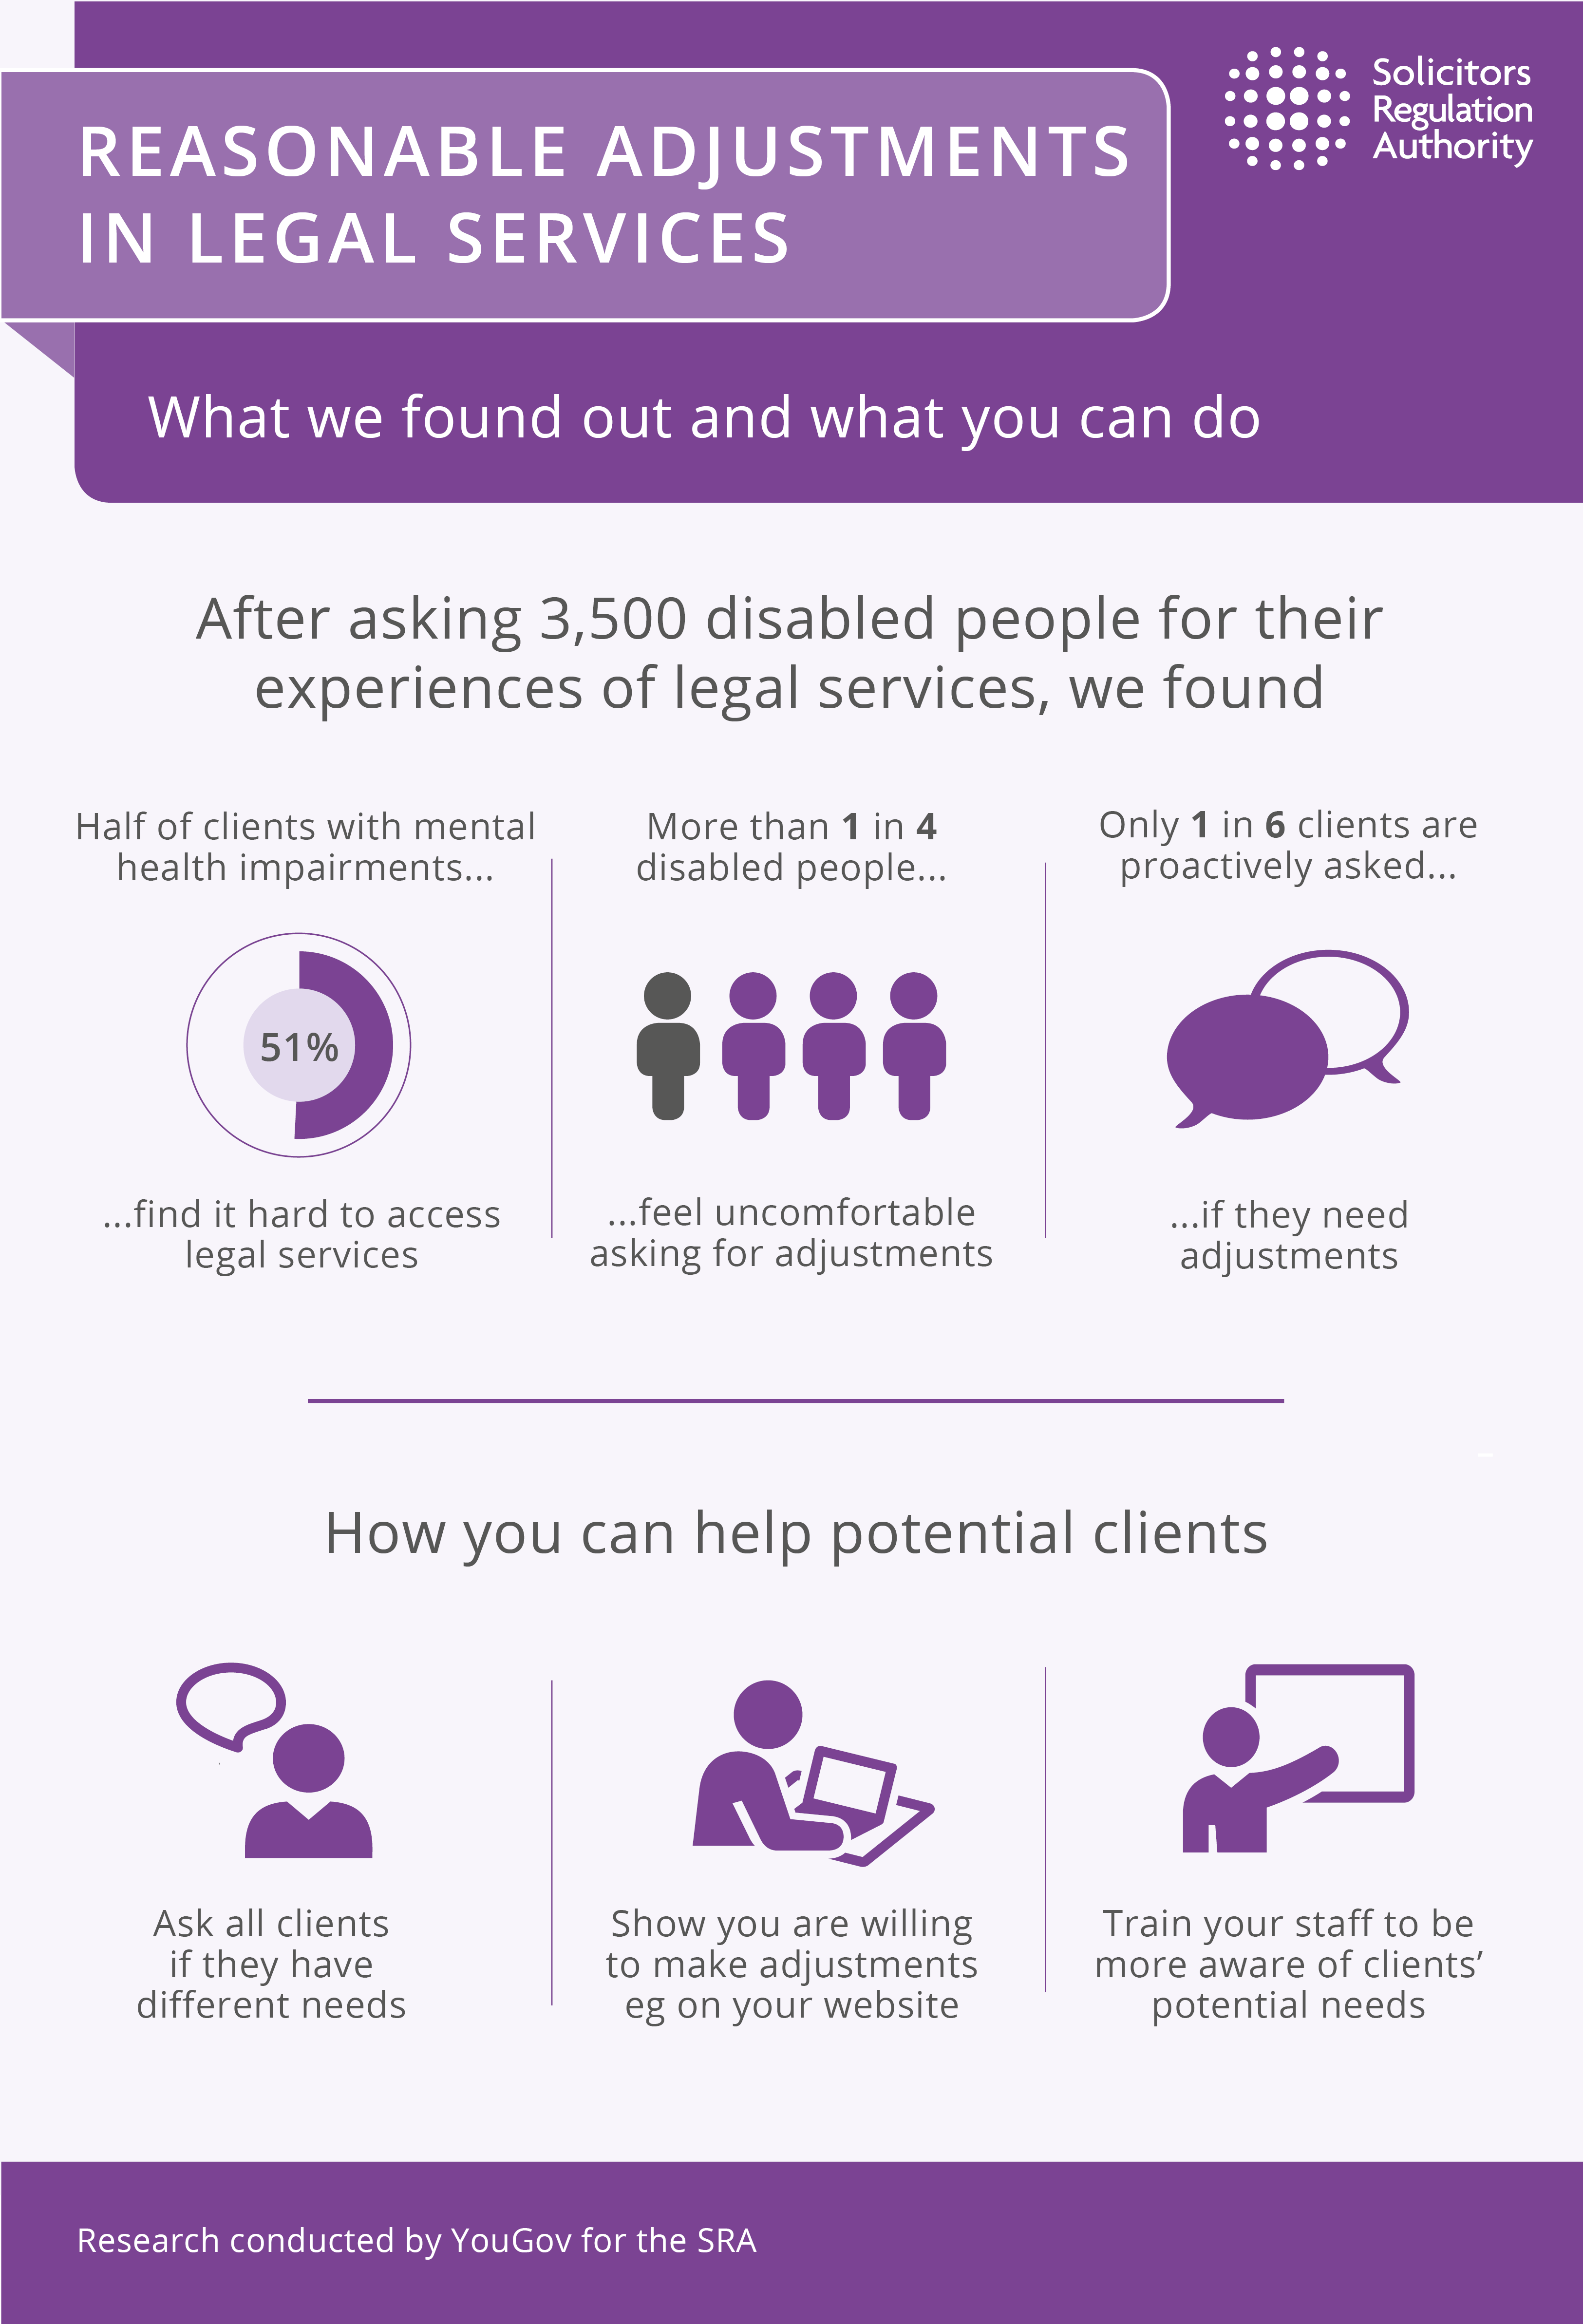 Reasonable adjustments in legal services infographic. After asking 3,500 disabled people for their experiences of legal services, we found. Half of clients with mental health impairments find it hard to access legal services. More than 1 in 4 disabled people feel uncomfortable asking for adjustments. Only 1 in 6 clients are proactively asked if they need adjustments. How you can help potential clients. Ask all clients if they have different needs. Show you are willing to make adjustments eg on your website. Train your staff to be more aware of clients’ potential needs. This research was conducted by YouGov for the SRA.